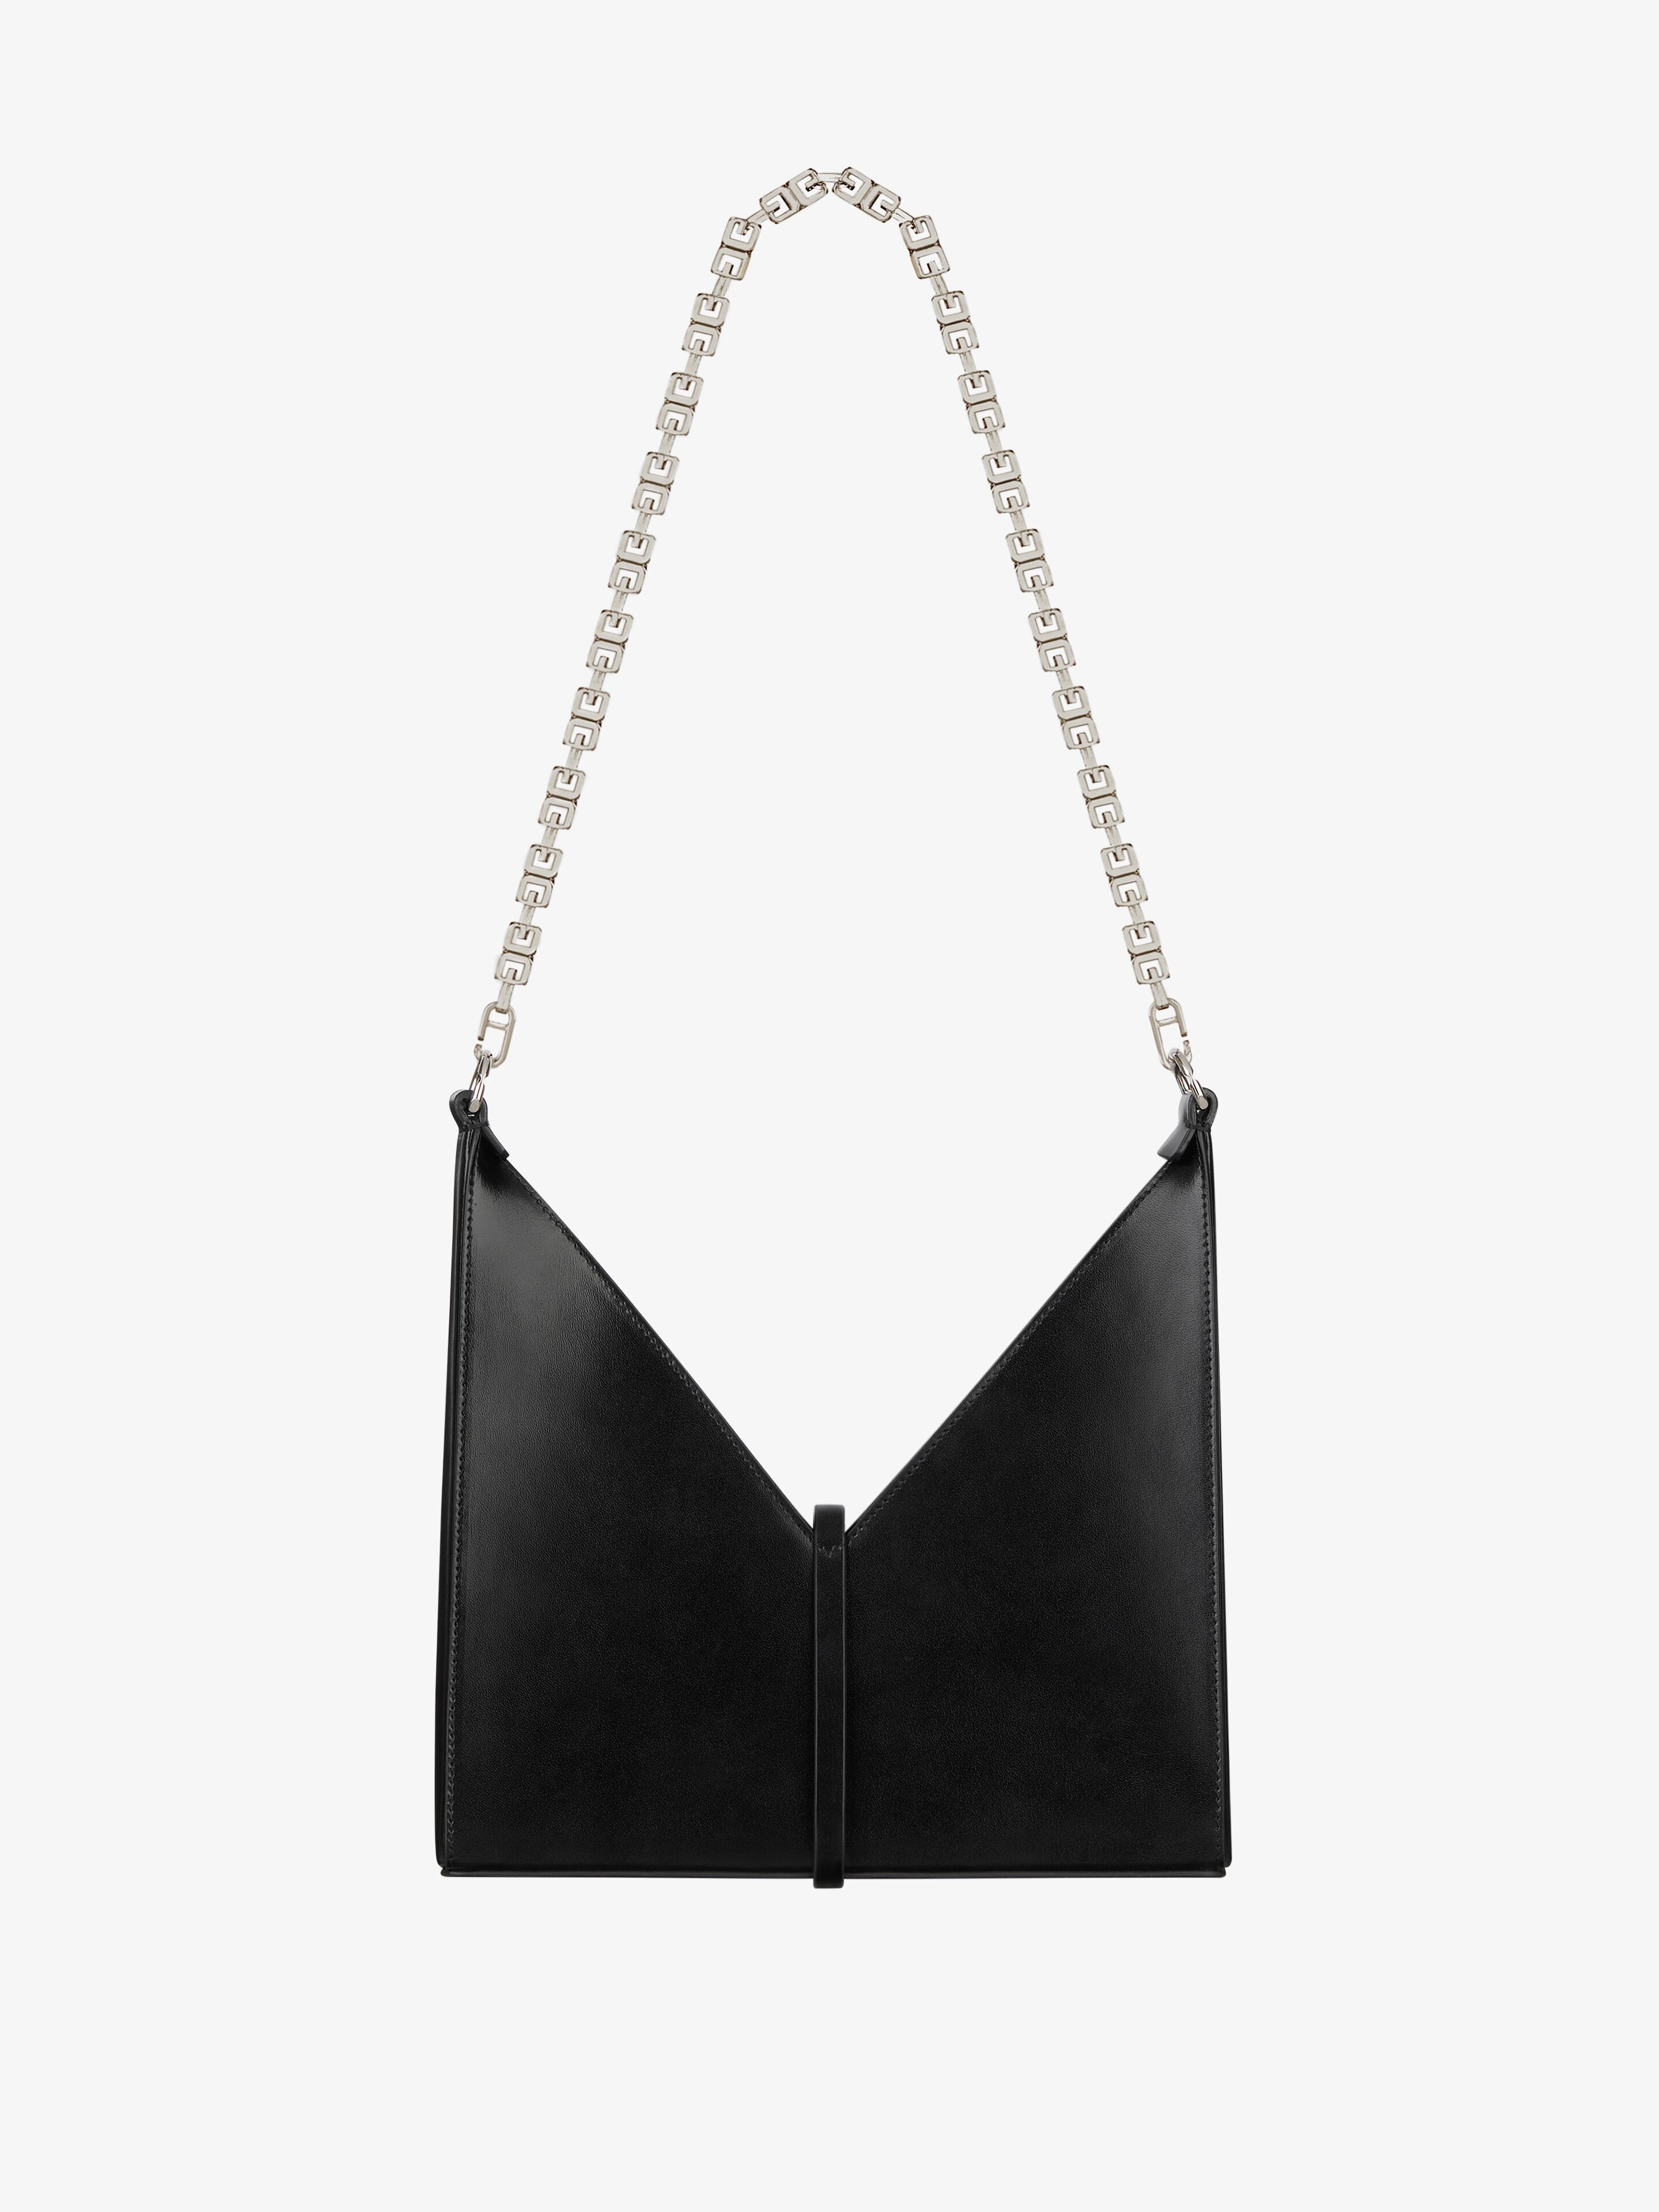 SMALL CUT OUT BAG IN BOX LEATHER WITH CHAIN - 5